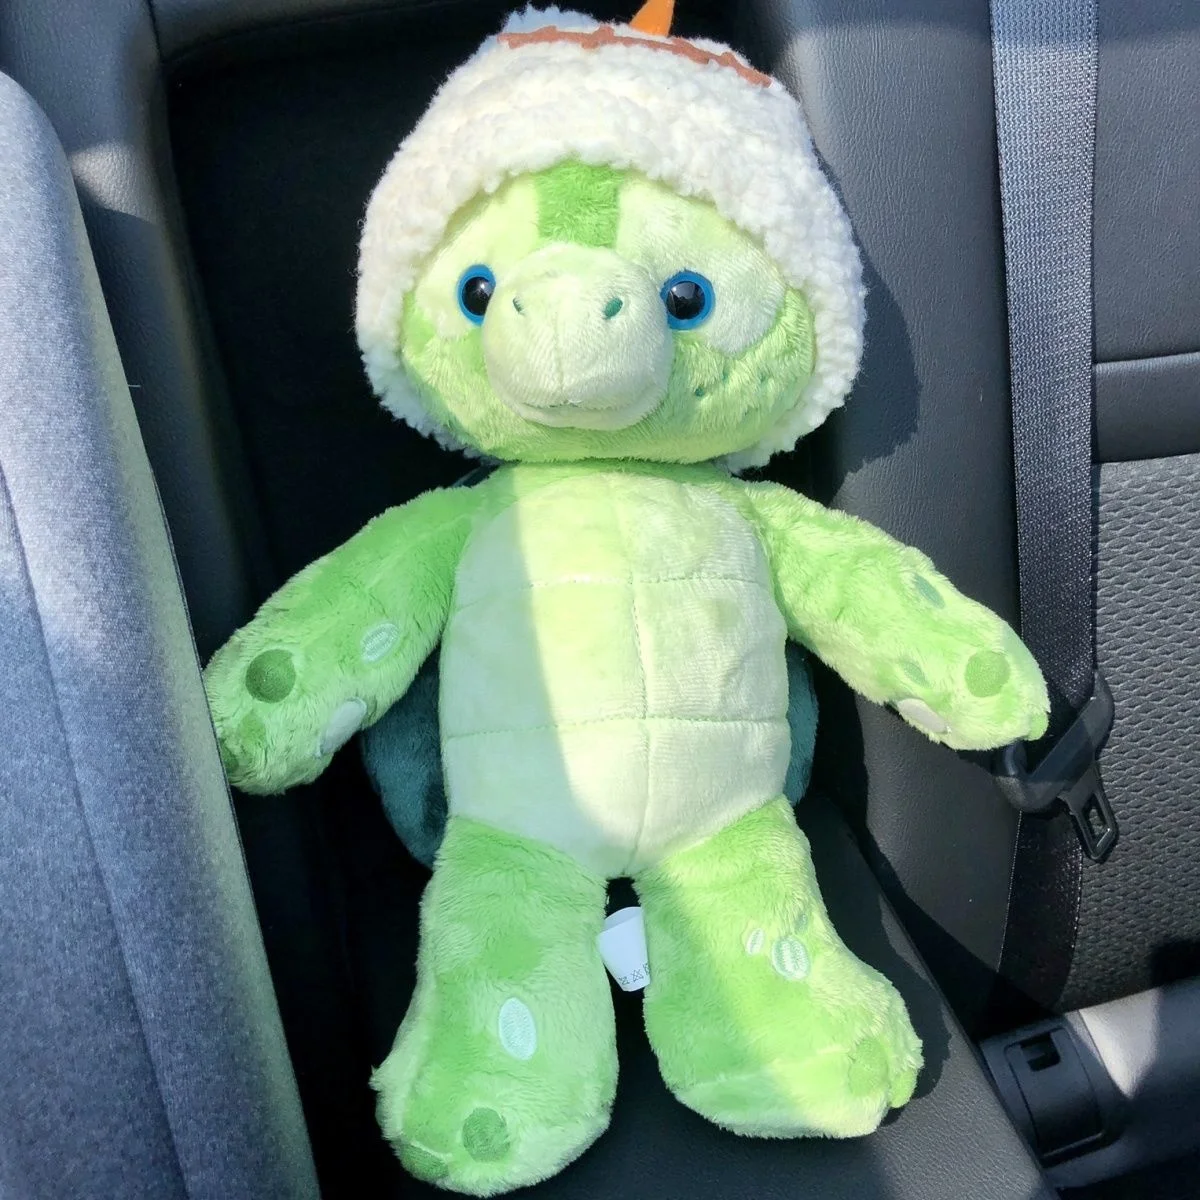 38cm Duffy And Friends Disney Olu Mel Plush Doll Kawaii Cute Sea Turtles Stuffed Toy With Winter Hat Lovely Gifts For Kids lovely newborn hospital hat preemie boys girls beanie solid with bear ears infant baby hats for spring autumn gift